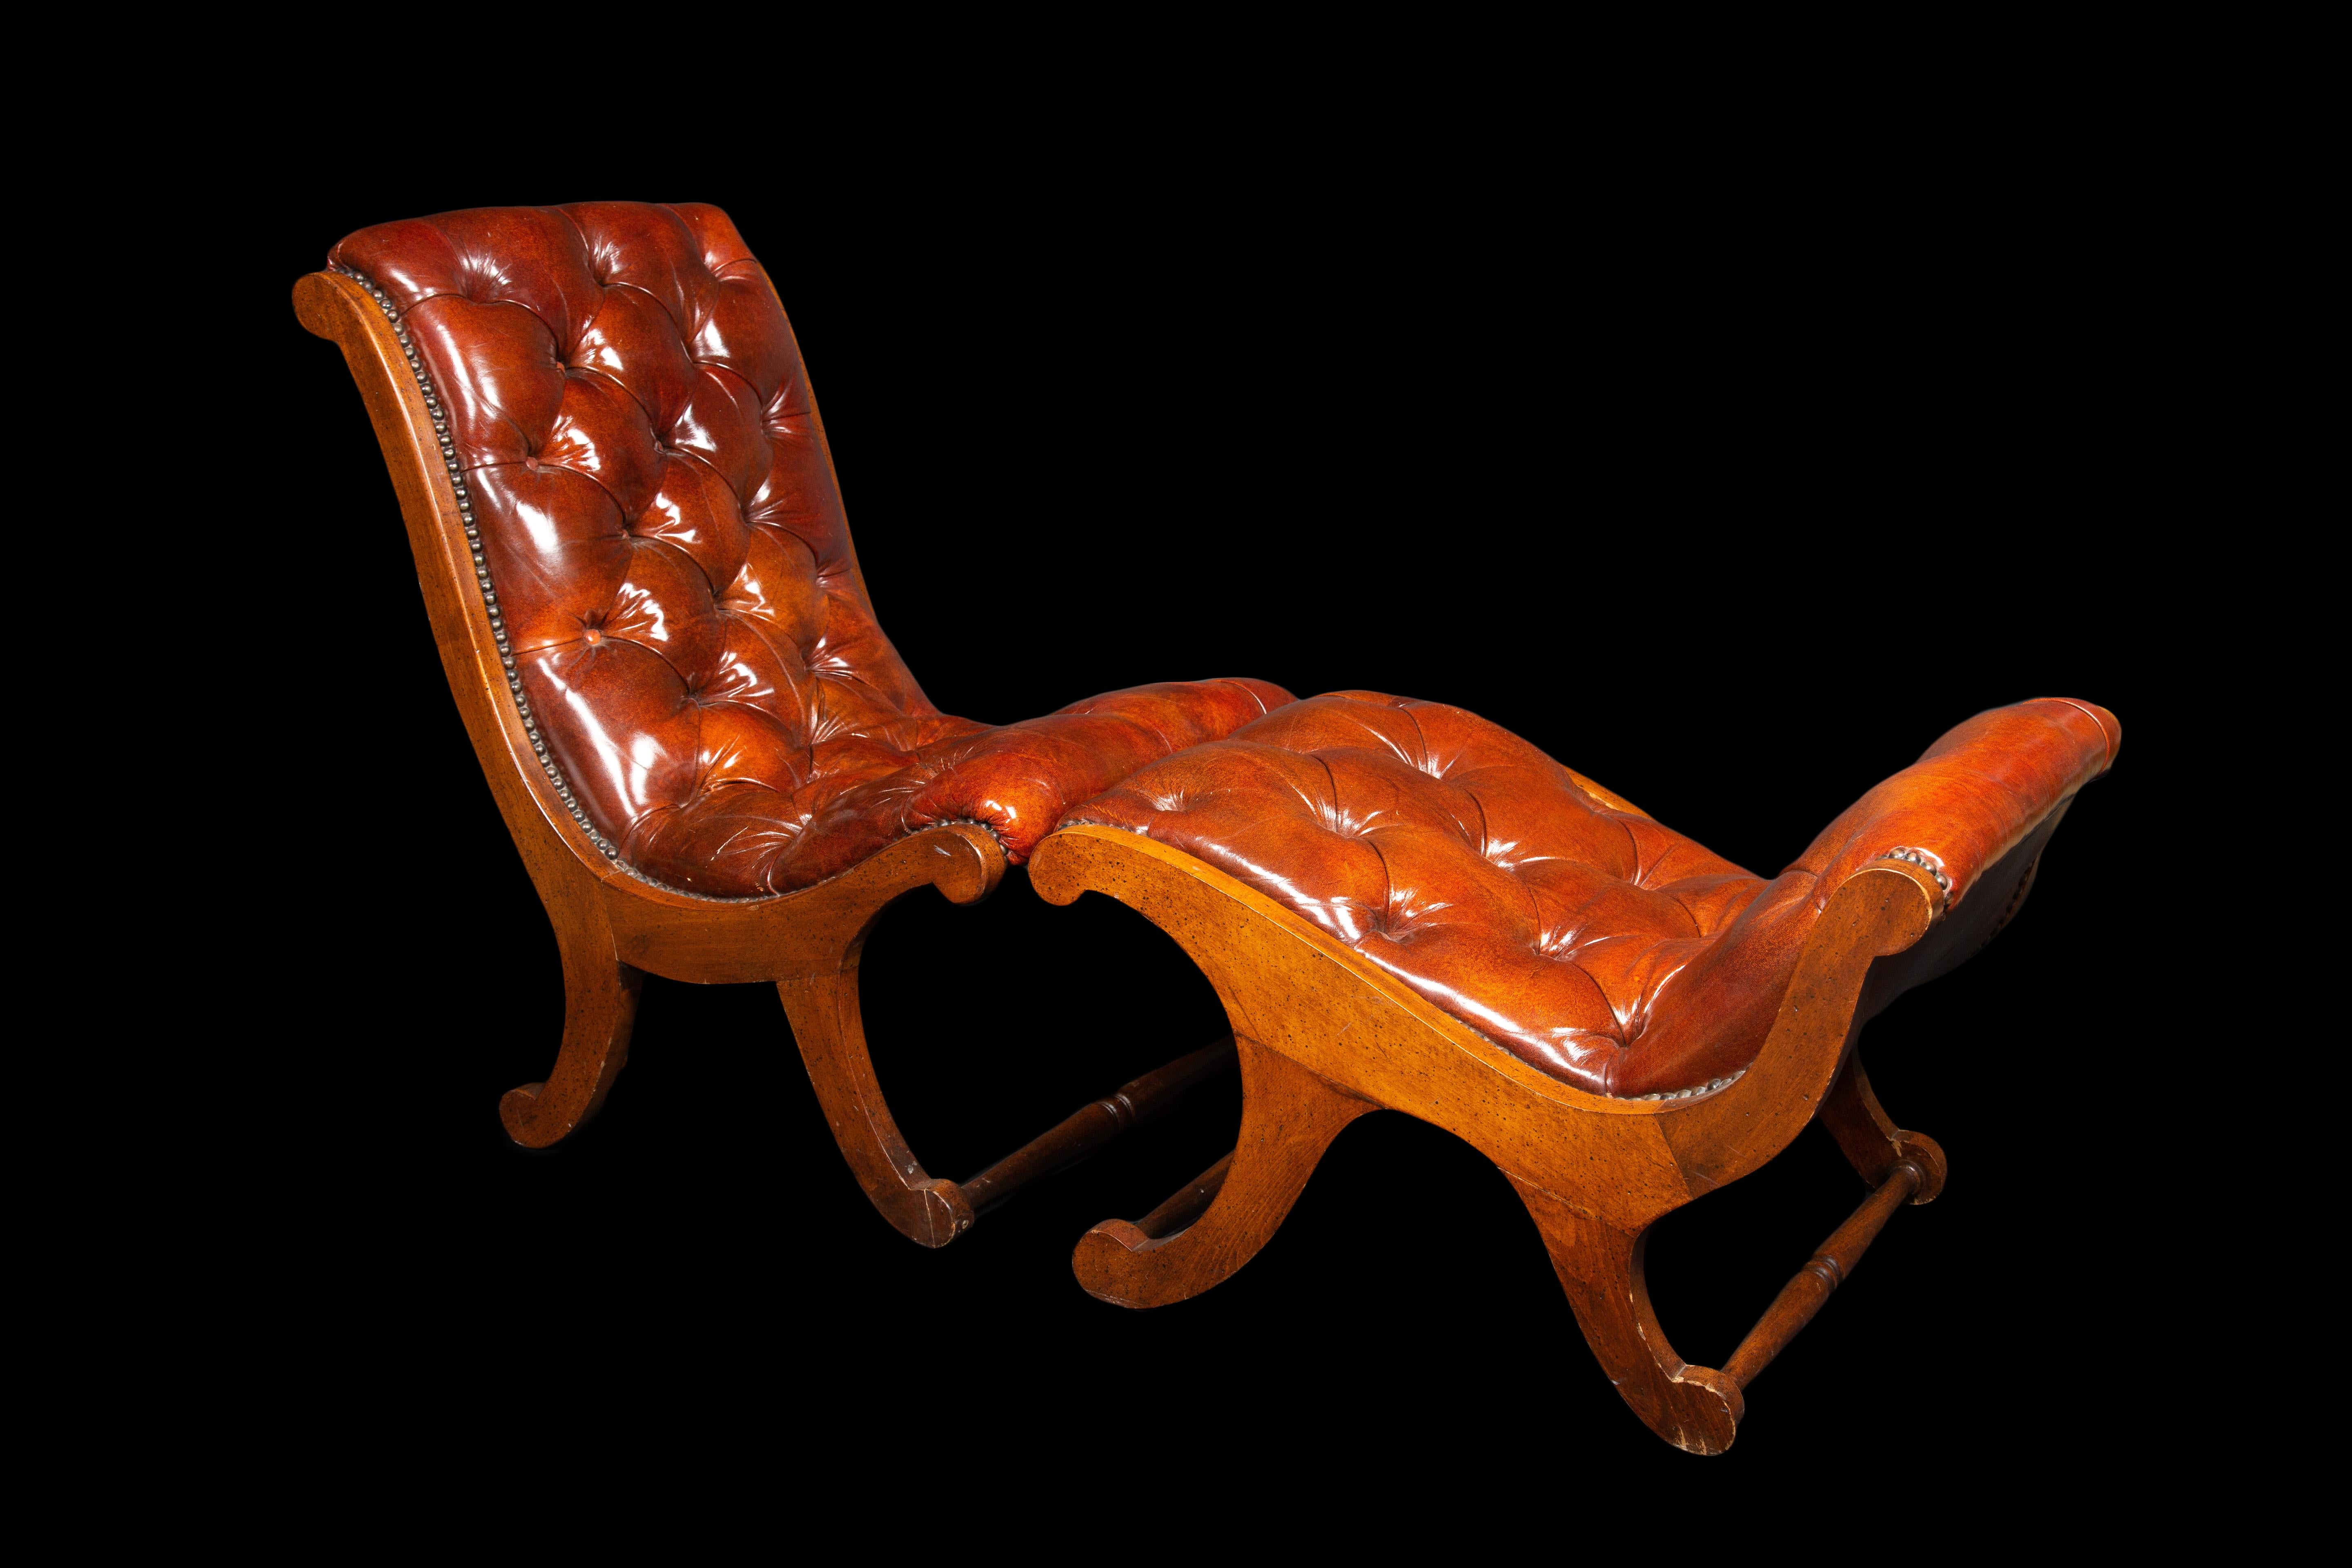 Georgian style tufted leather chair & ottoman, gout stool form.

Chair measures: 19.5